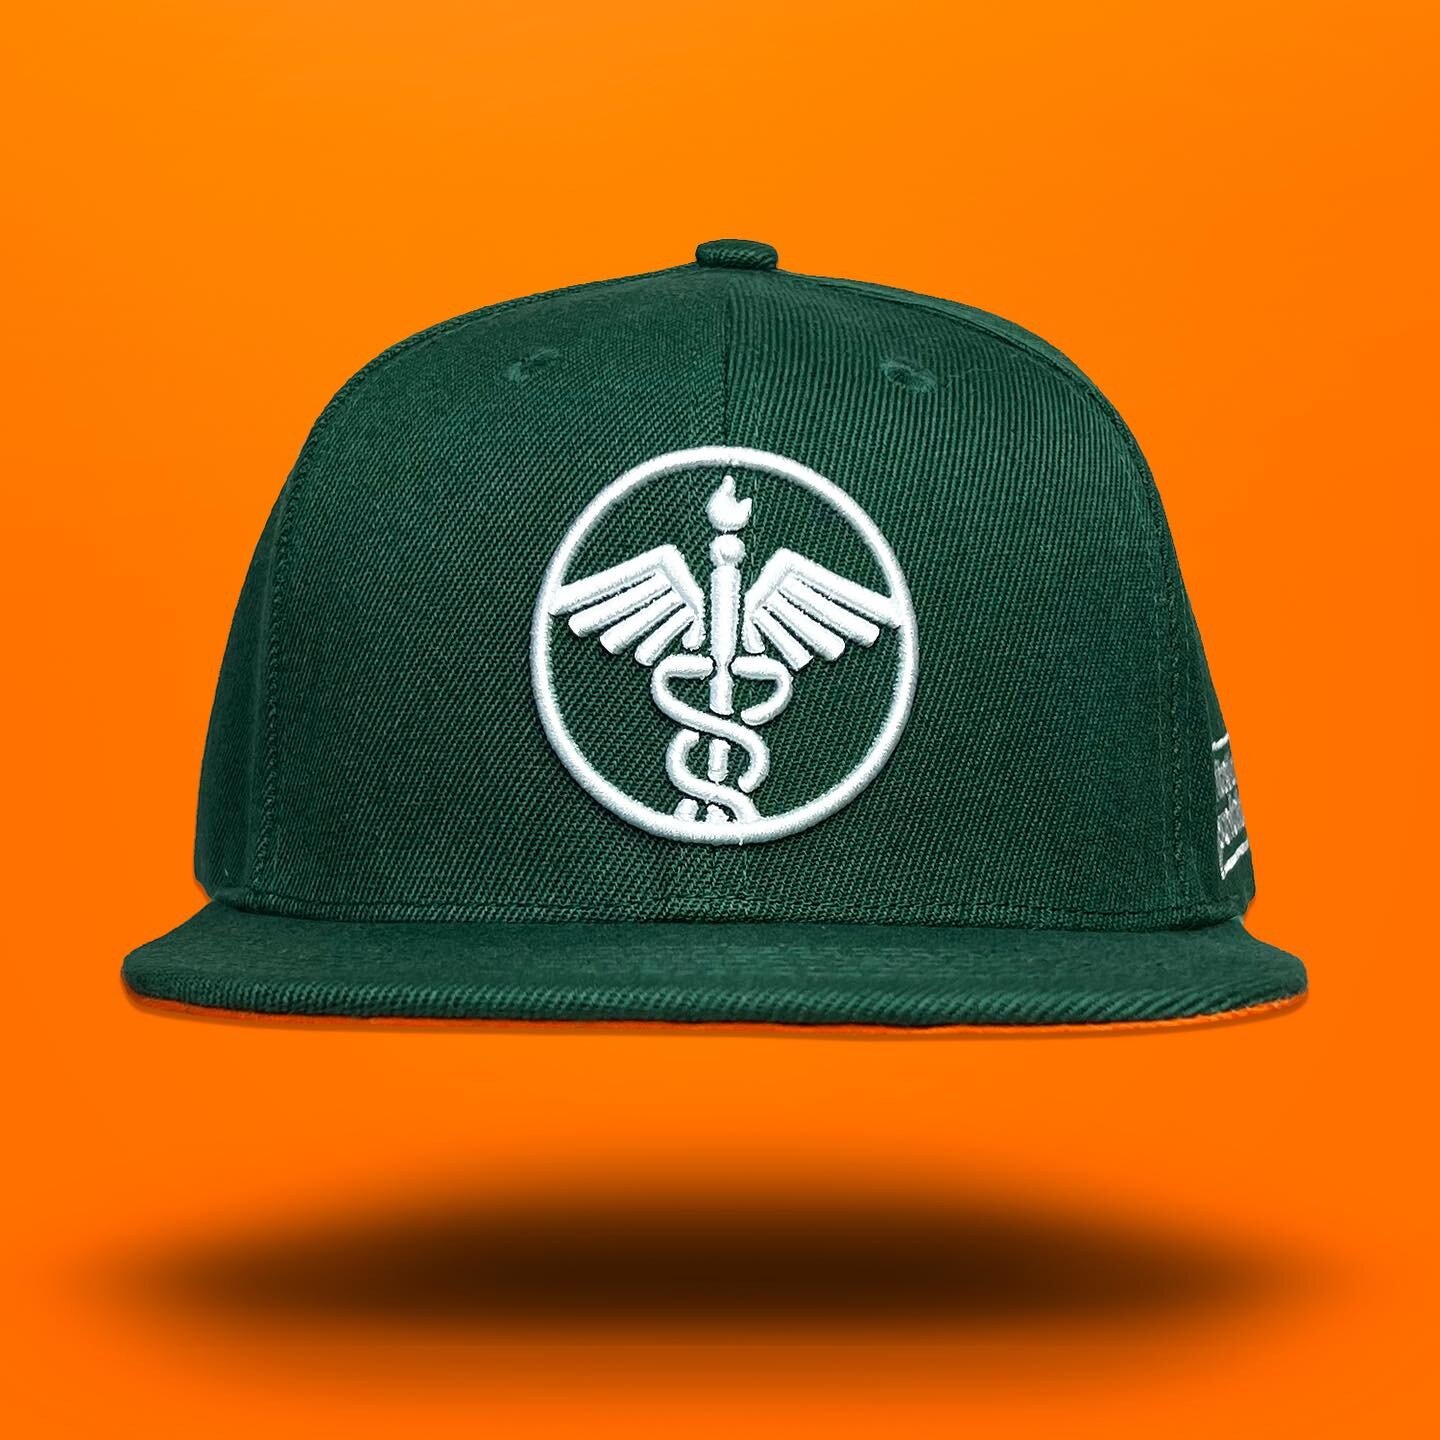 Help us raise another $2,000 for @sanitationfoundation New Green/Orange colorway available now!

#sanitationfoundation #dsny #bongiornobrand #sanitation #nonprofit #headwear #hats #nyc